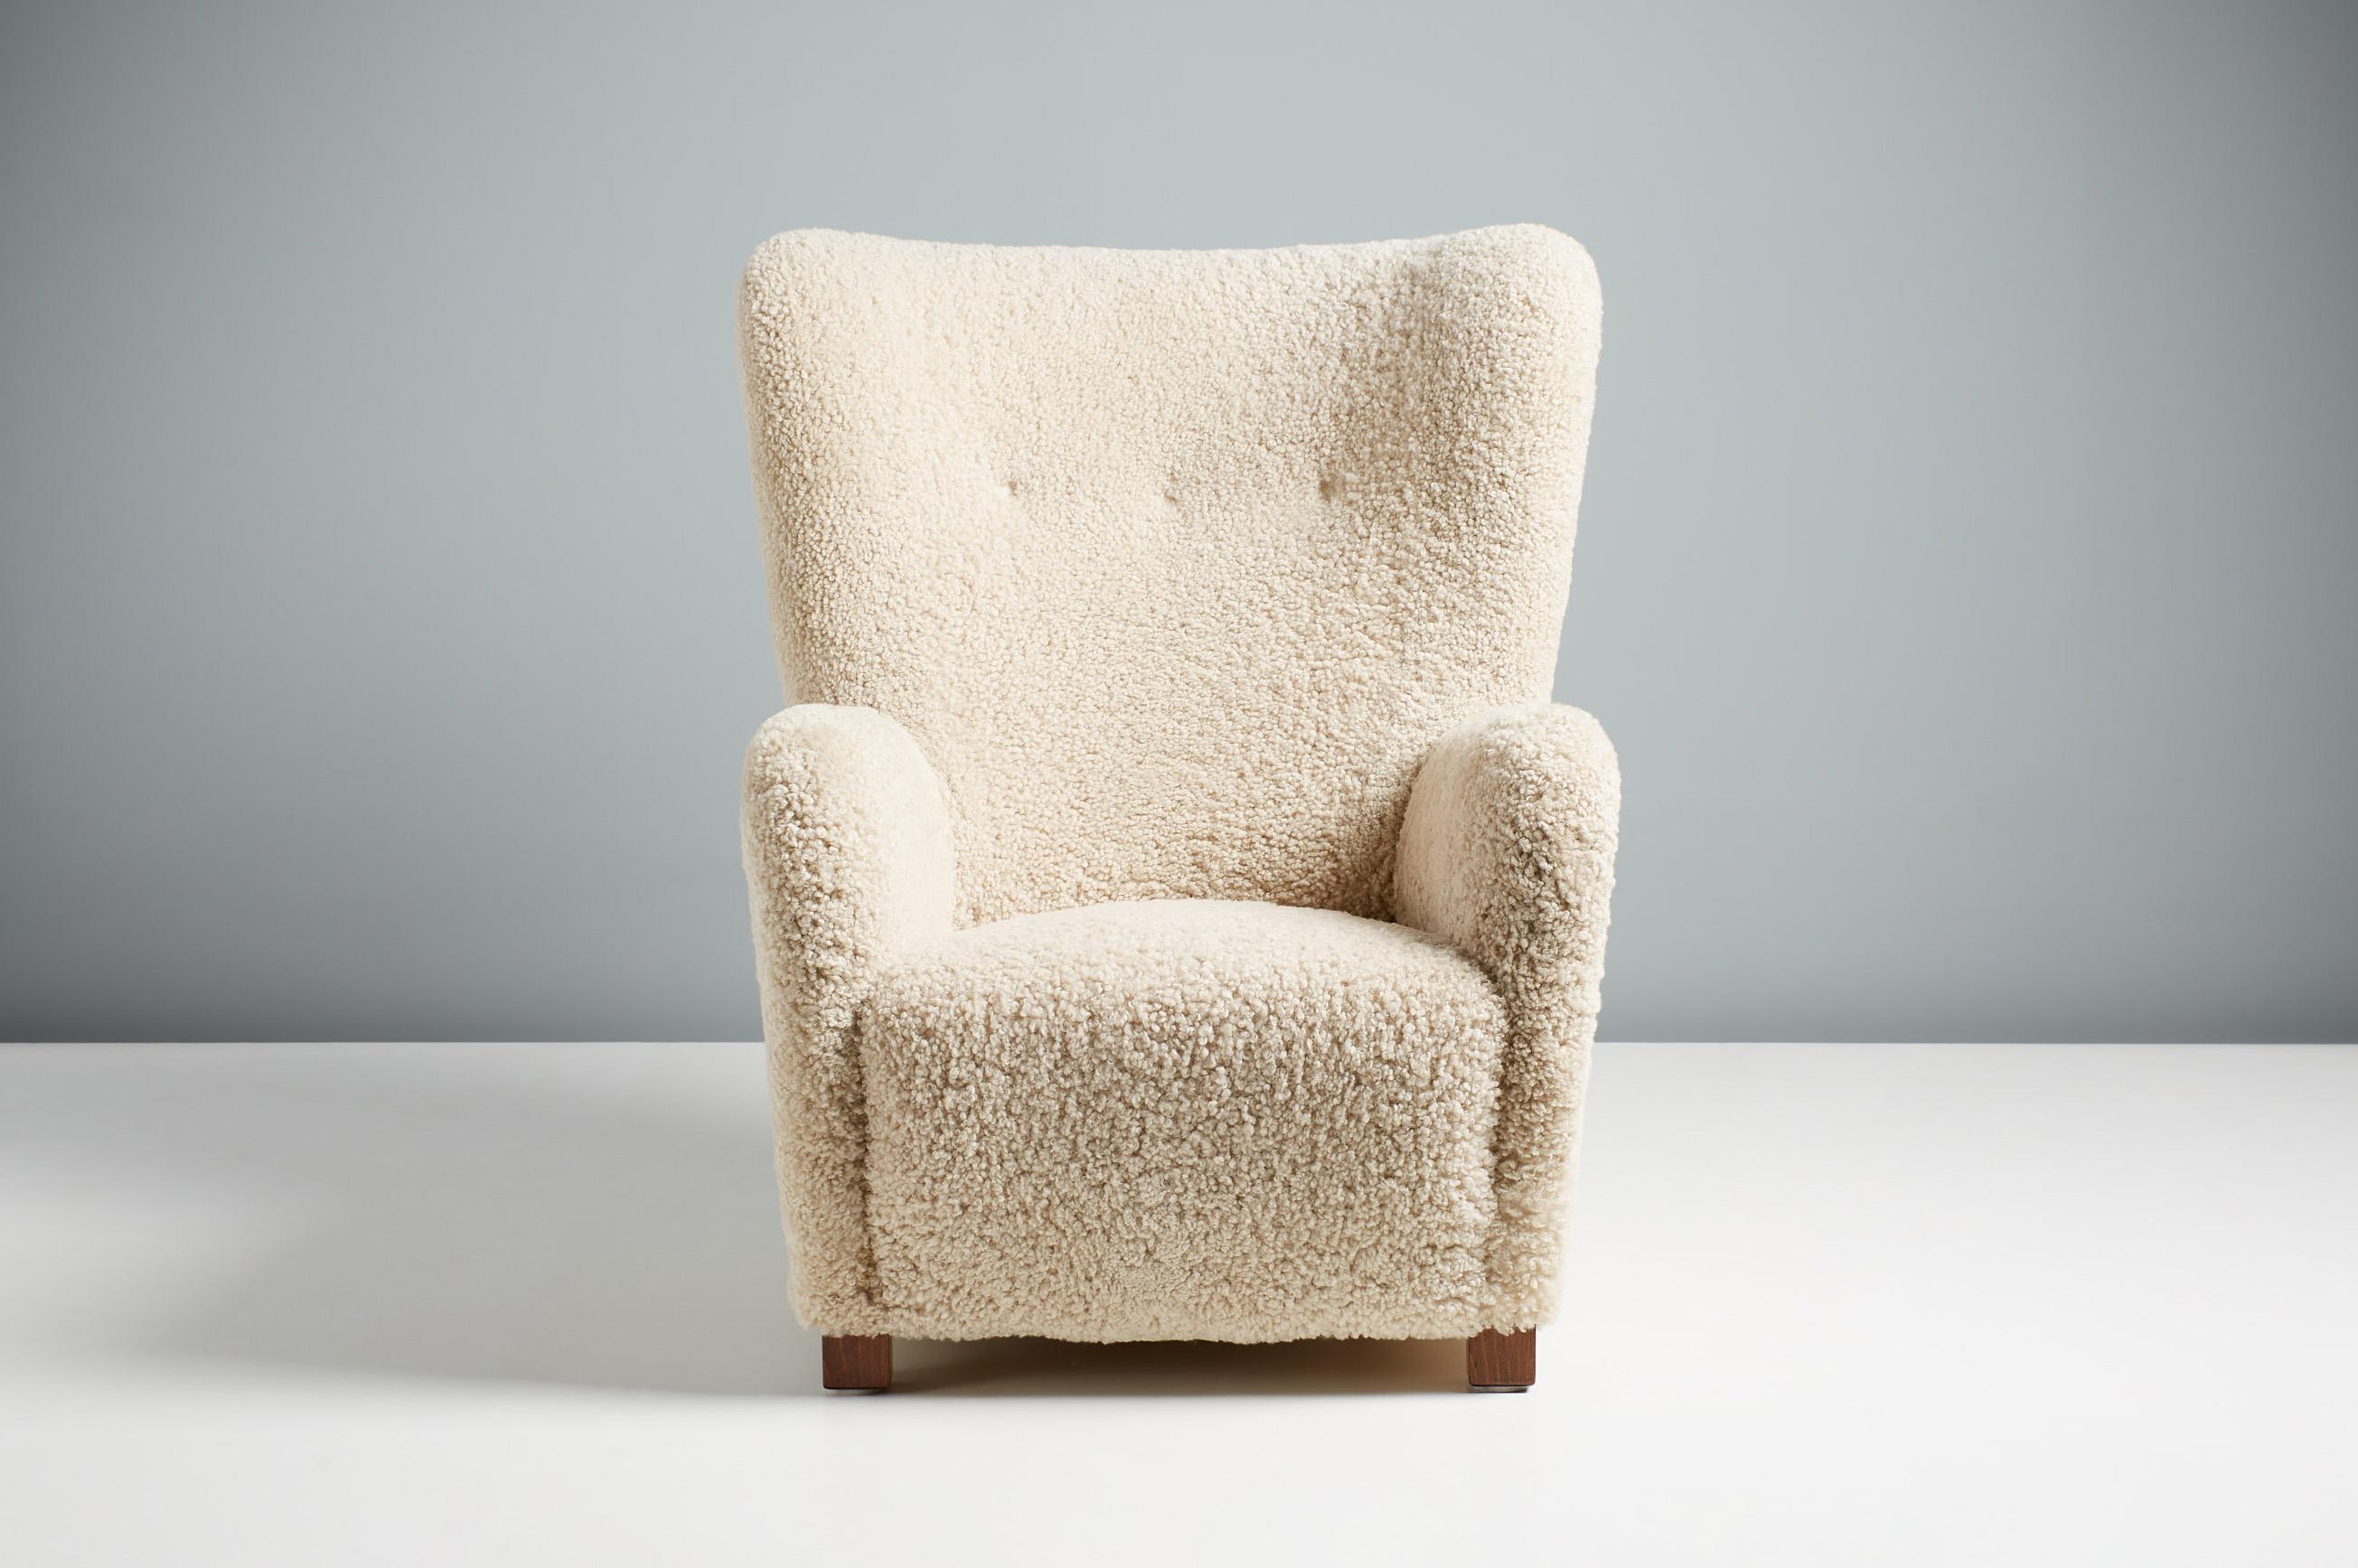 Danish Cabinetmaker Sheepskin Armchair, circa 1940s.

This tall Lounge chair produced by a Danish Cabinetmaker in the 1940s and is typical of Danish lounge chair designs of the day. It features a curved wing-back with stained beech legs. The chair